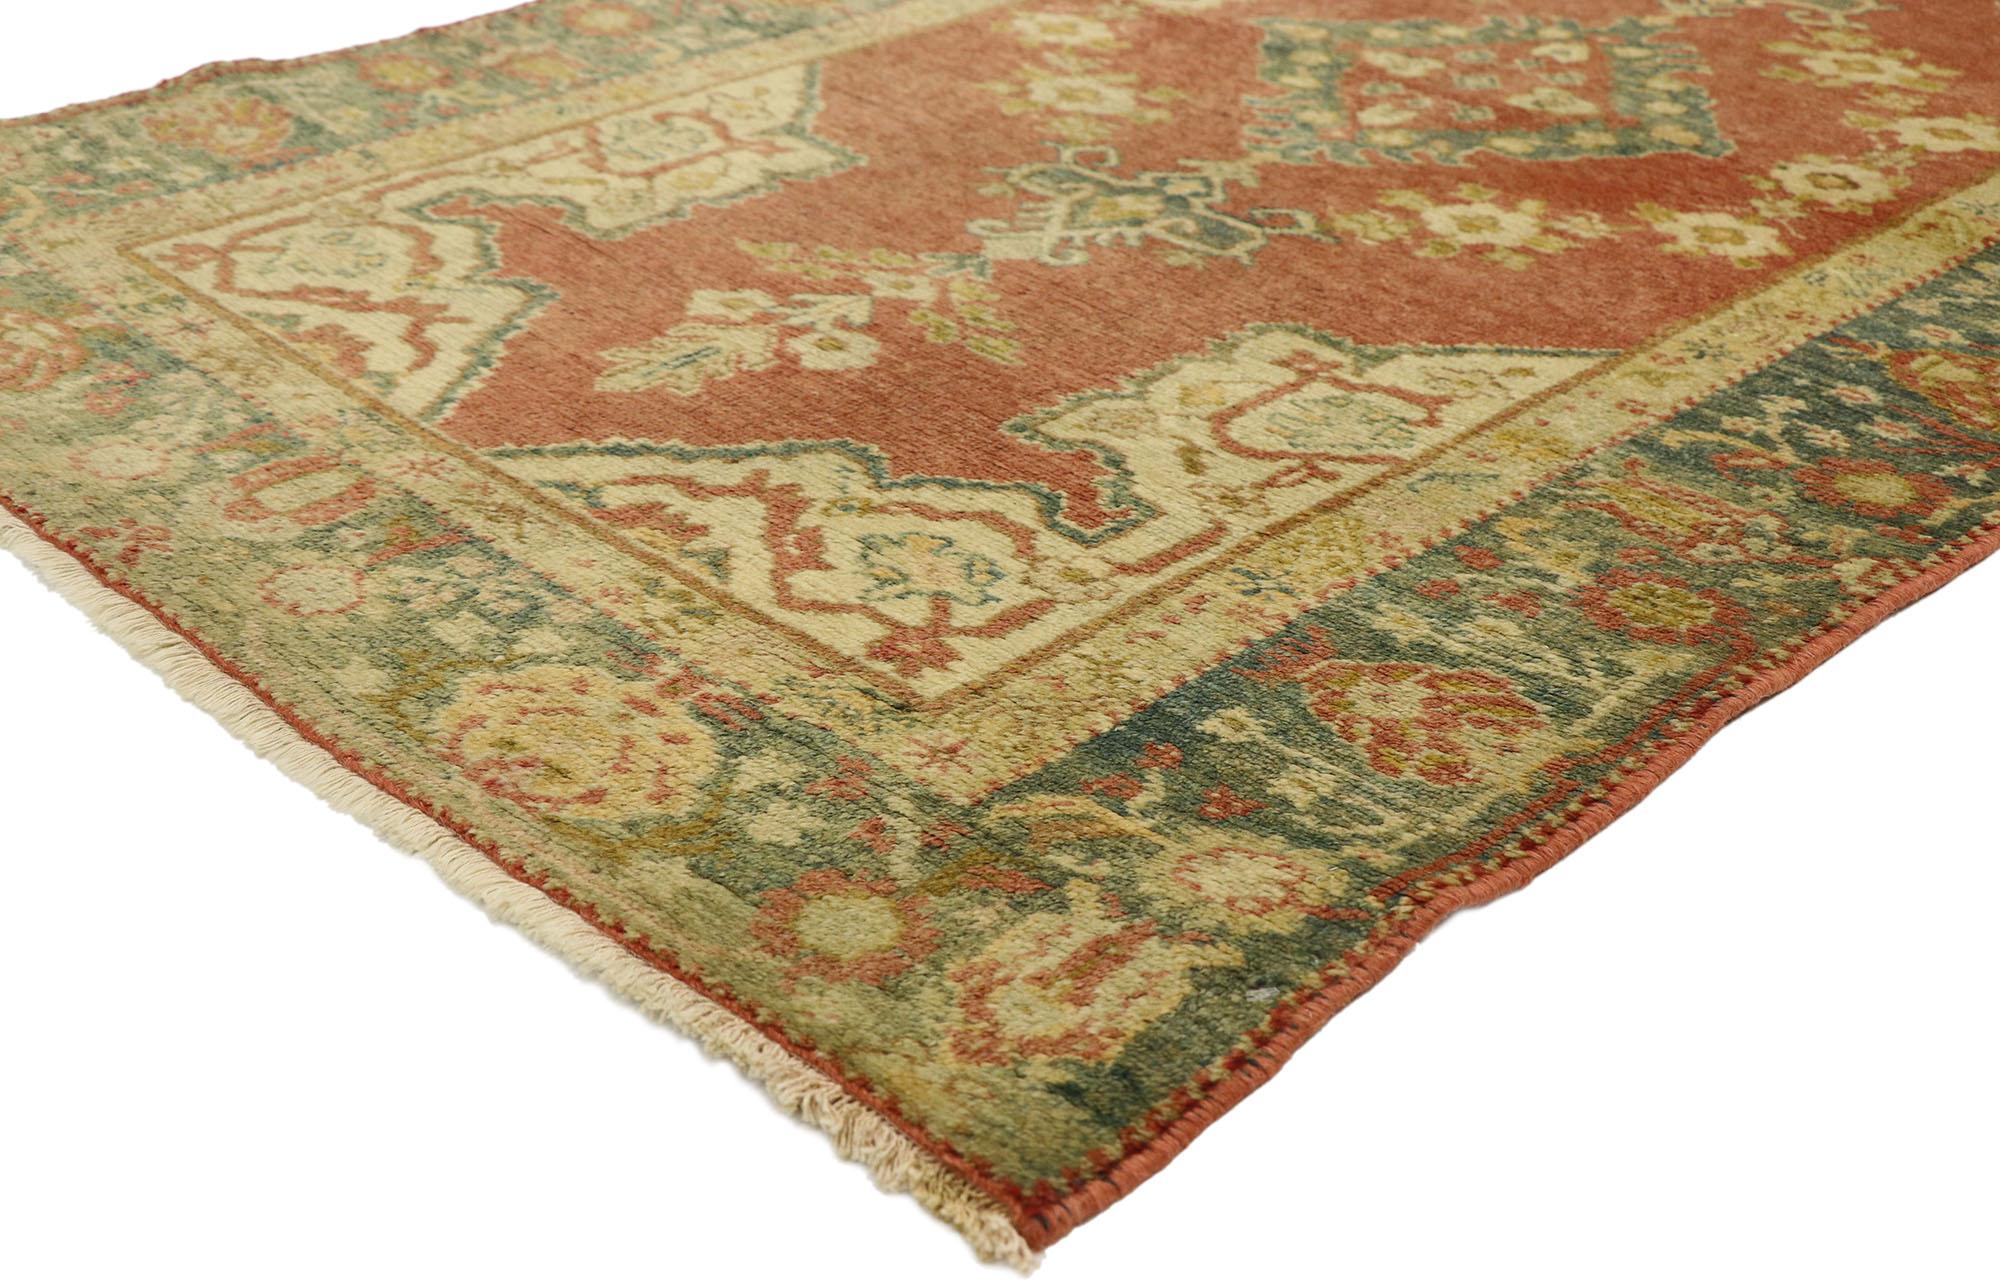 73915 Vintage Turkish Oushak Rug, 03'06 x 06'02. Immerse yourself in a hand knotted vintage Turkish Oushak rug woven with threads of Anatolian history and hues softened by the gentle passage of time. Picture a brick red field, its surface alive with